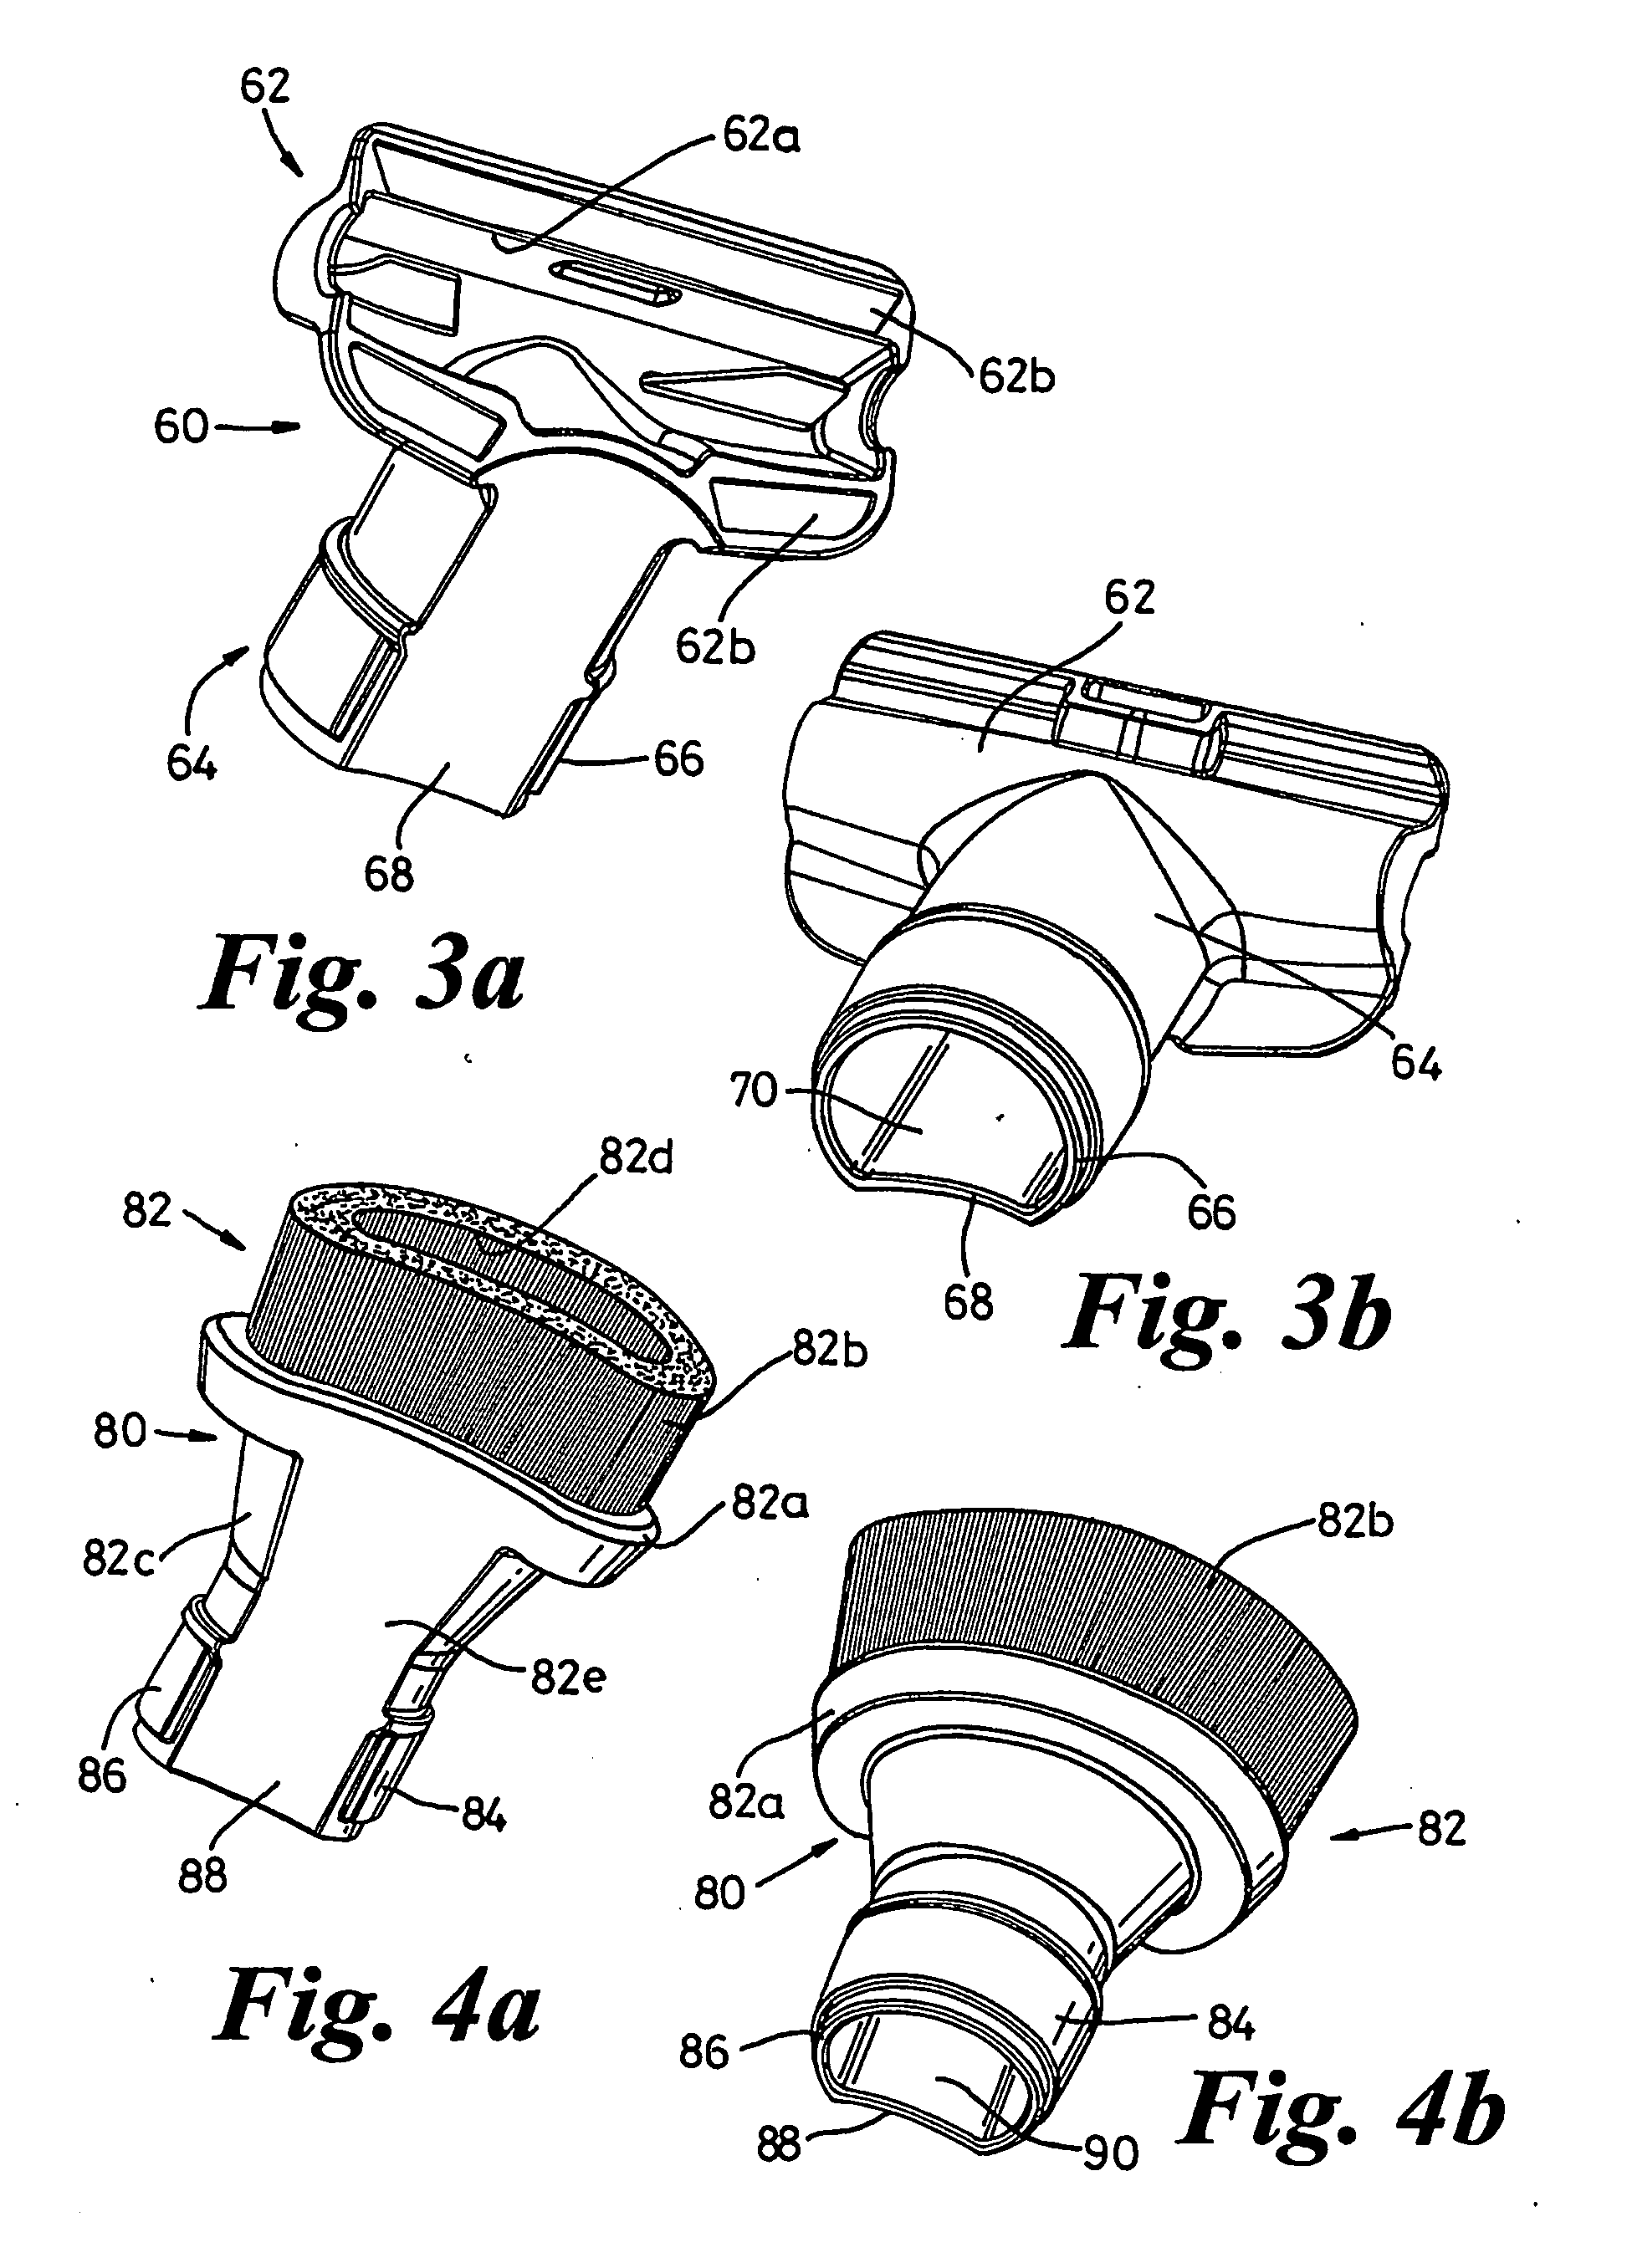 Attachment for a Cleaning Appliance